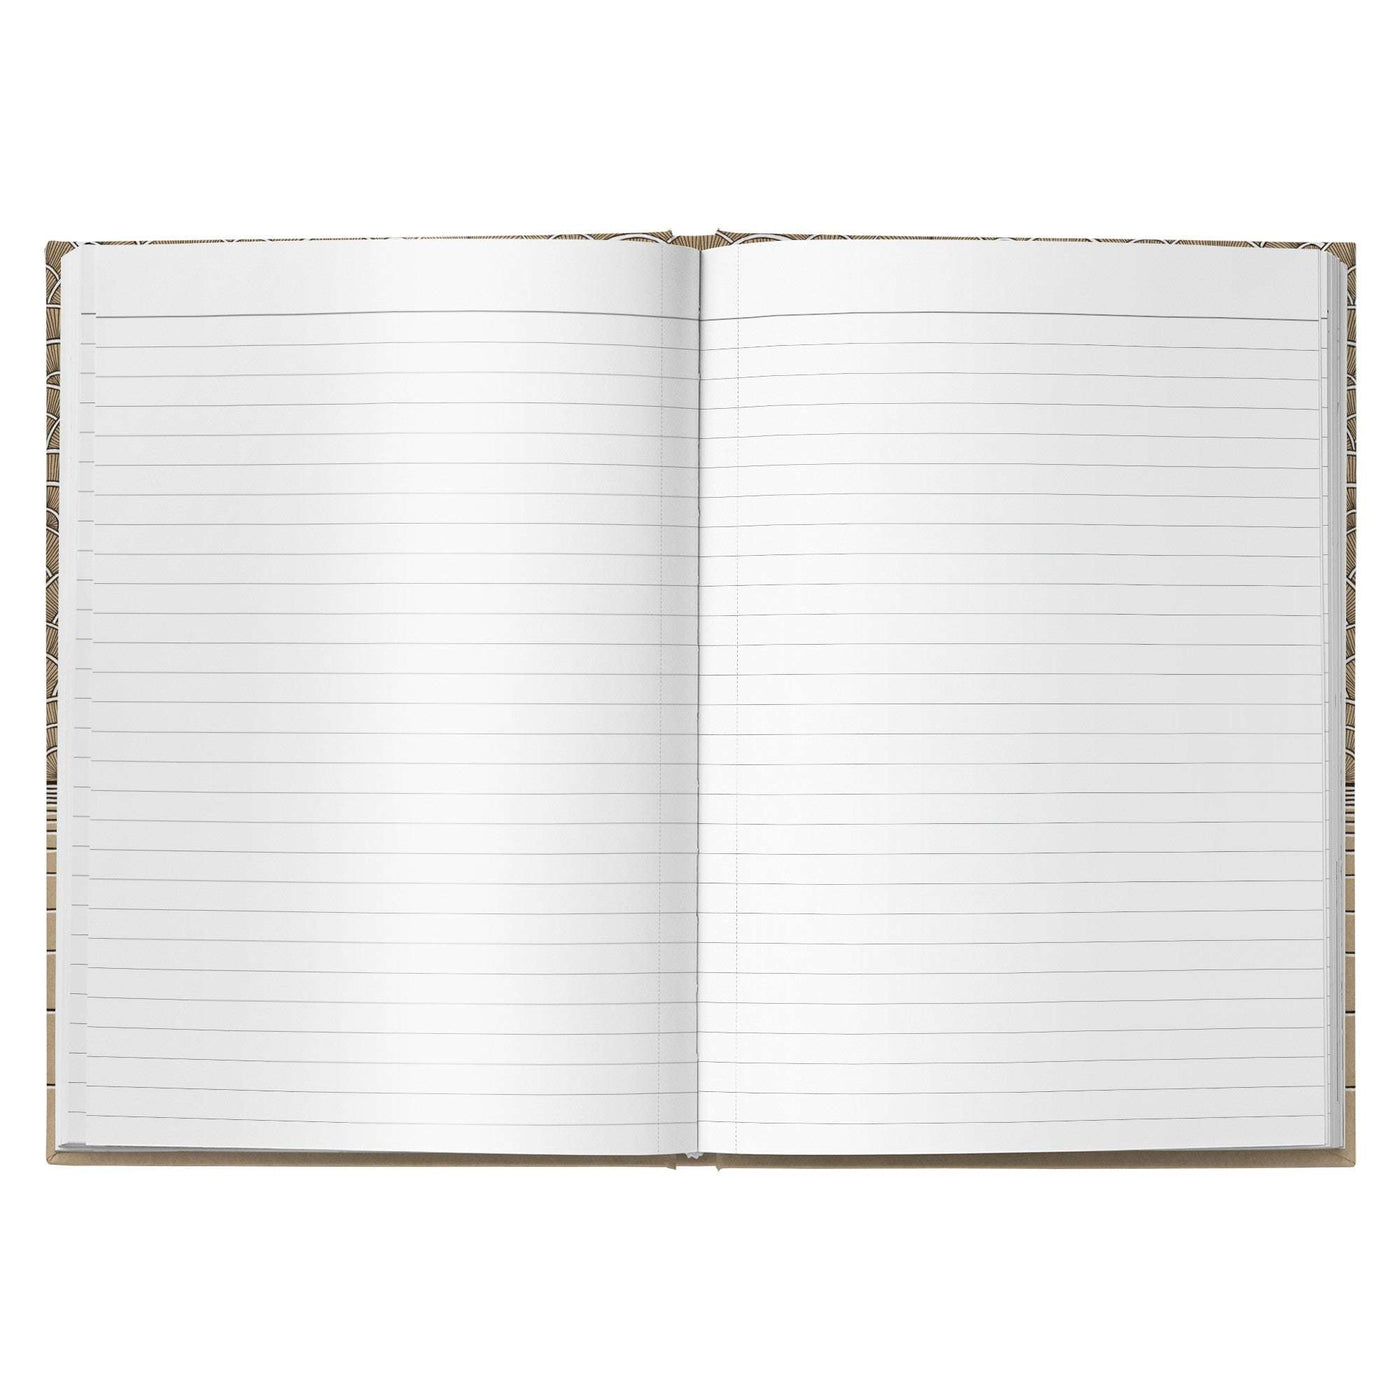 Open Sun Bear Journal with blank lined pages, centered on a white background.